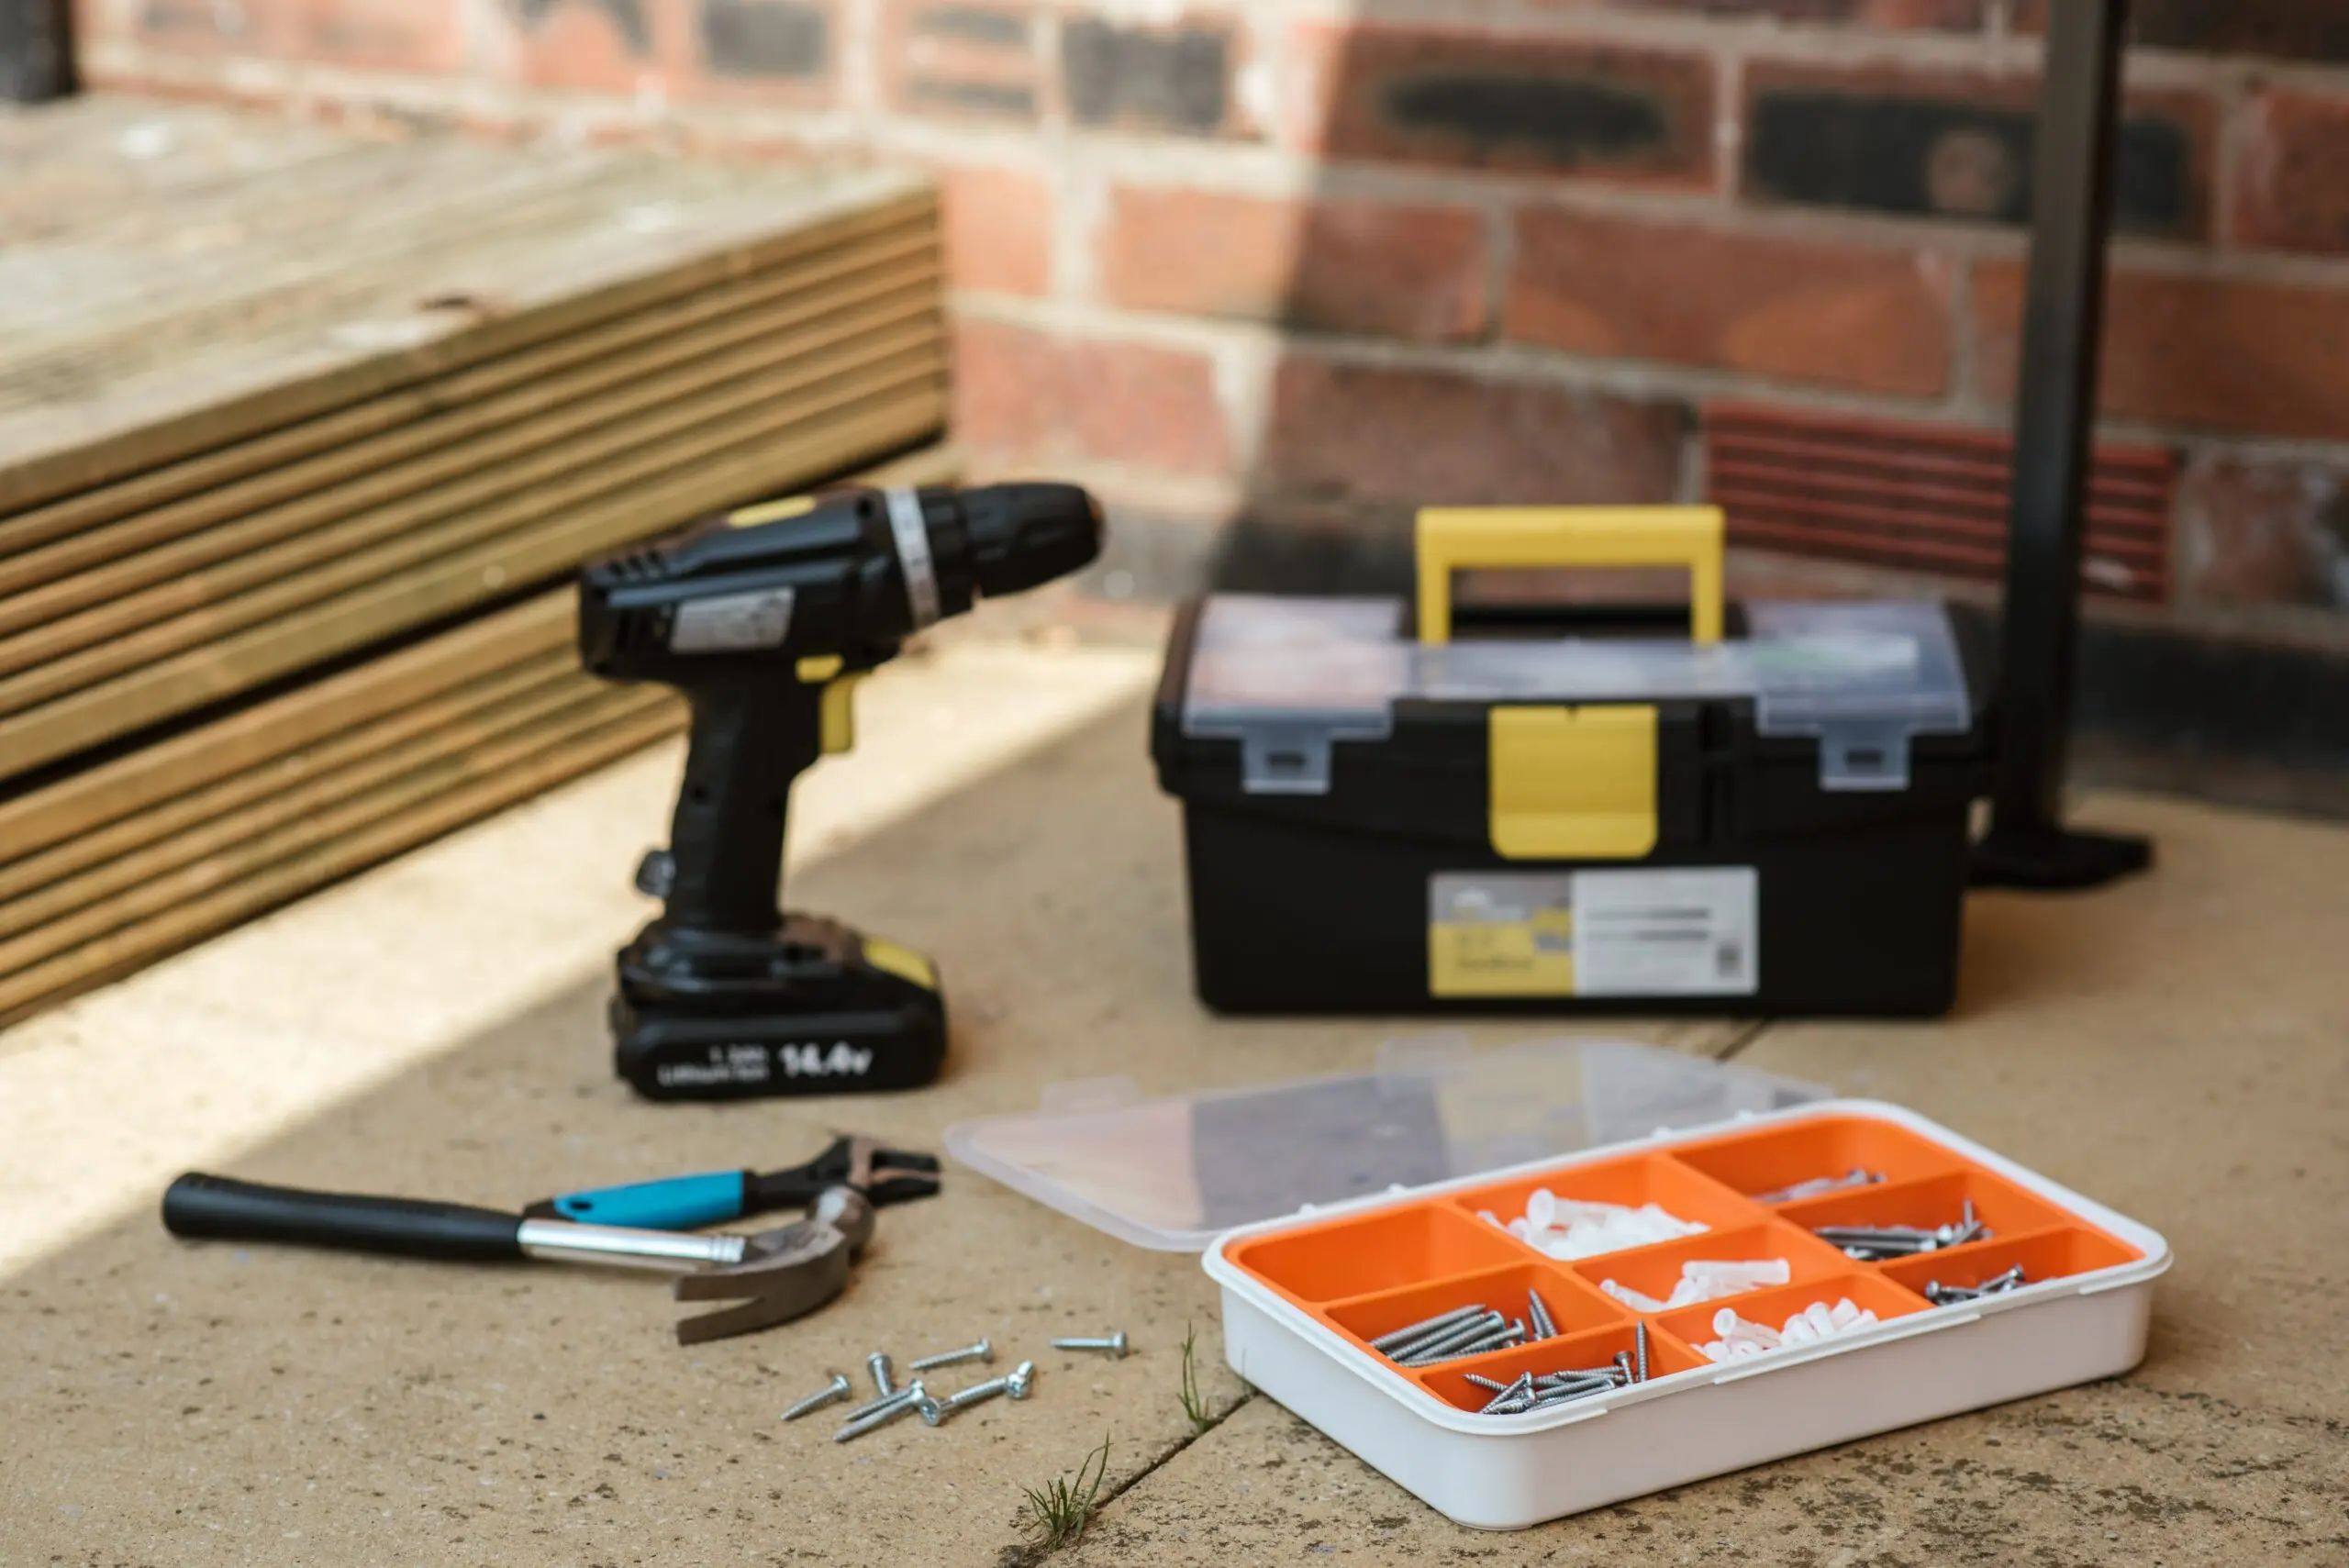 Dremel tool: The perfect tool for any project